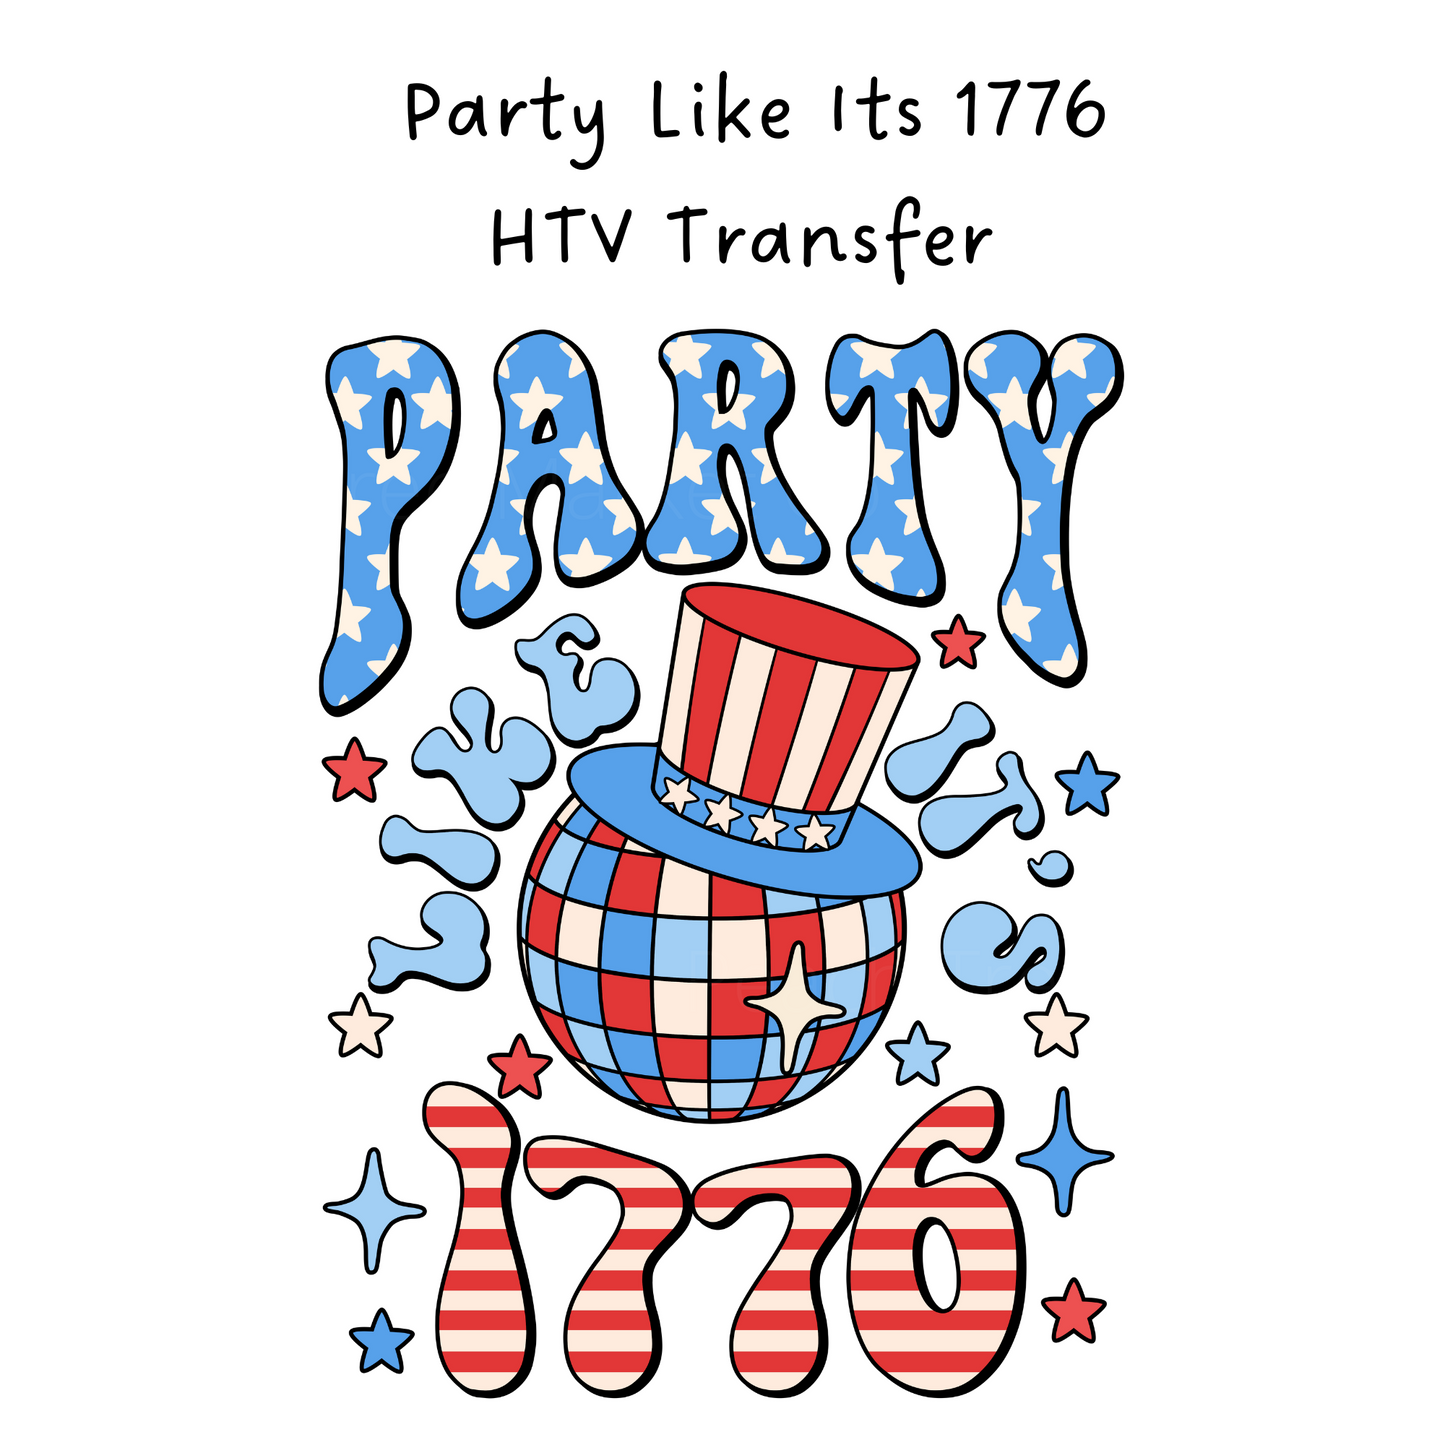 Party Like Its 1776 HTV Transfer